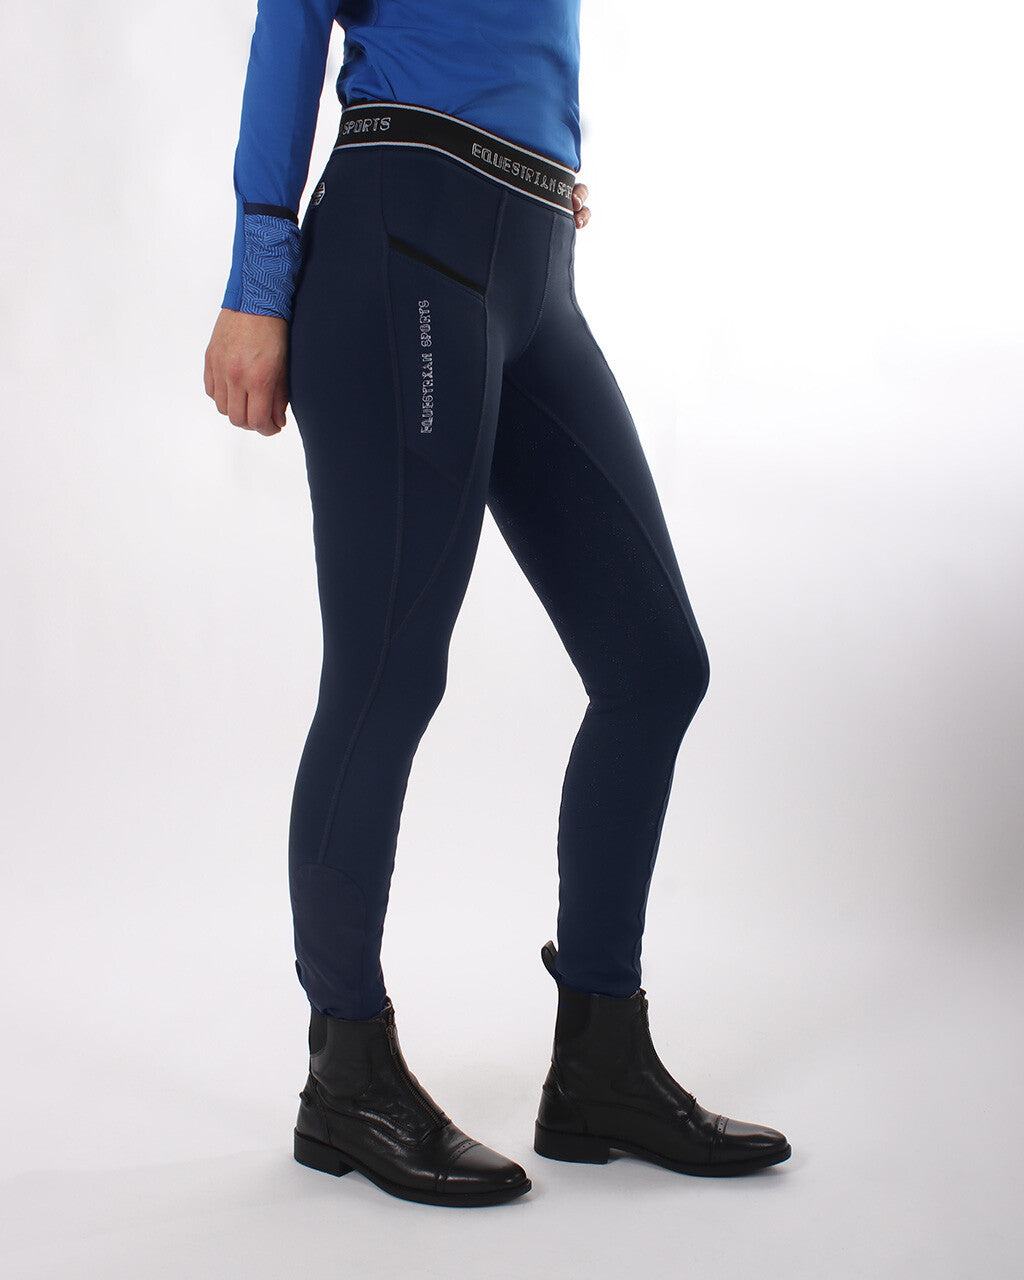 Riding Tights Skye Anti-Slip FS - OUTLET